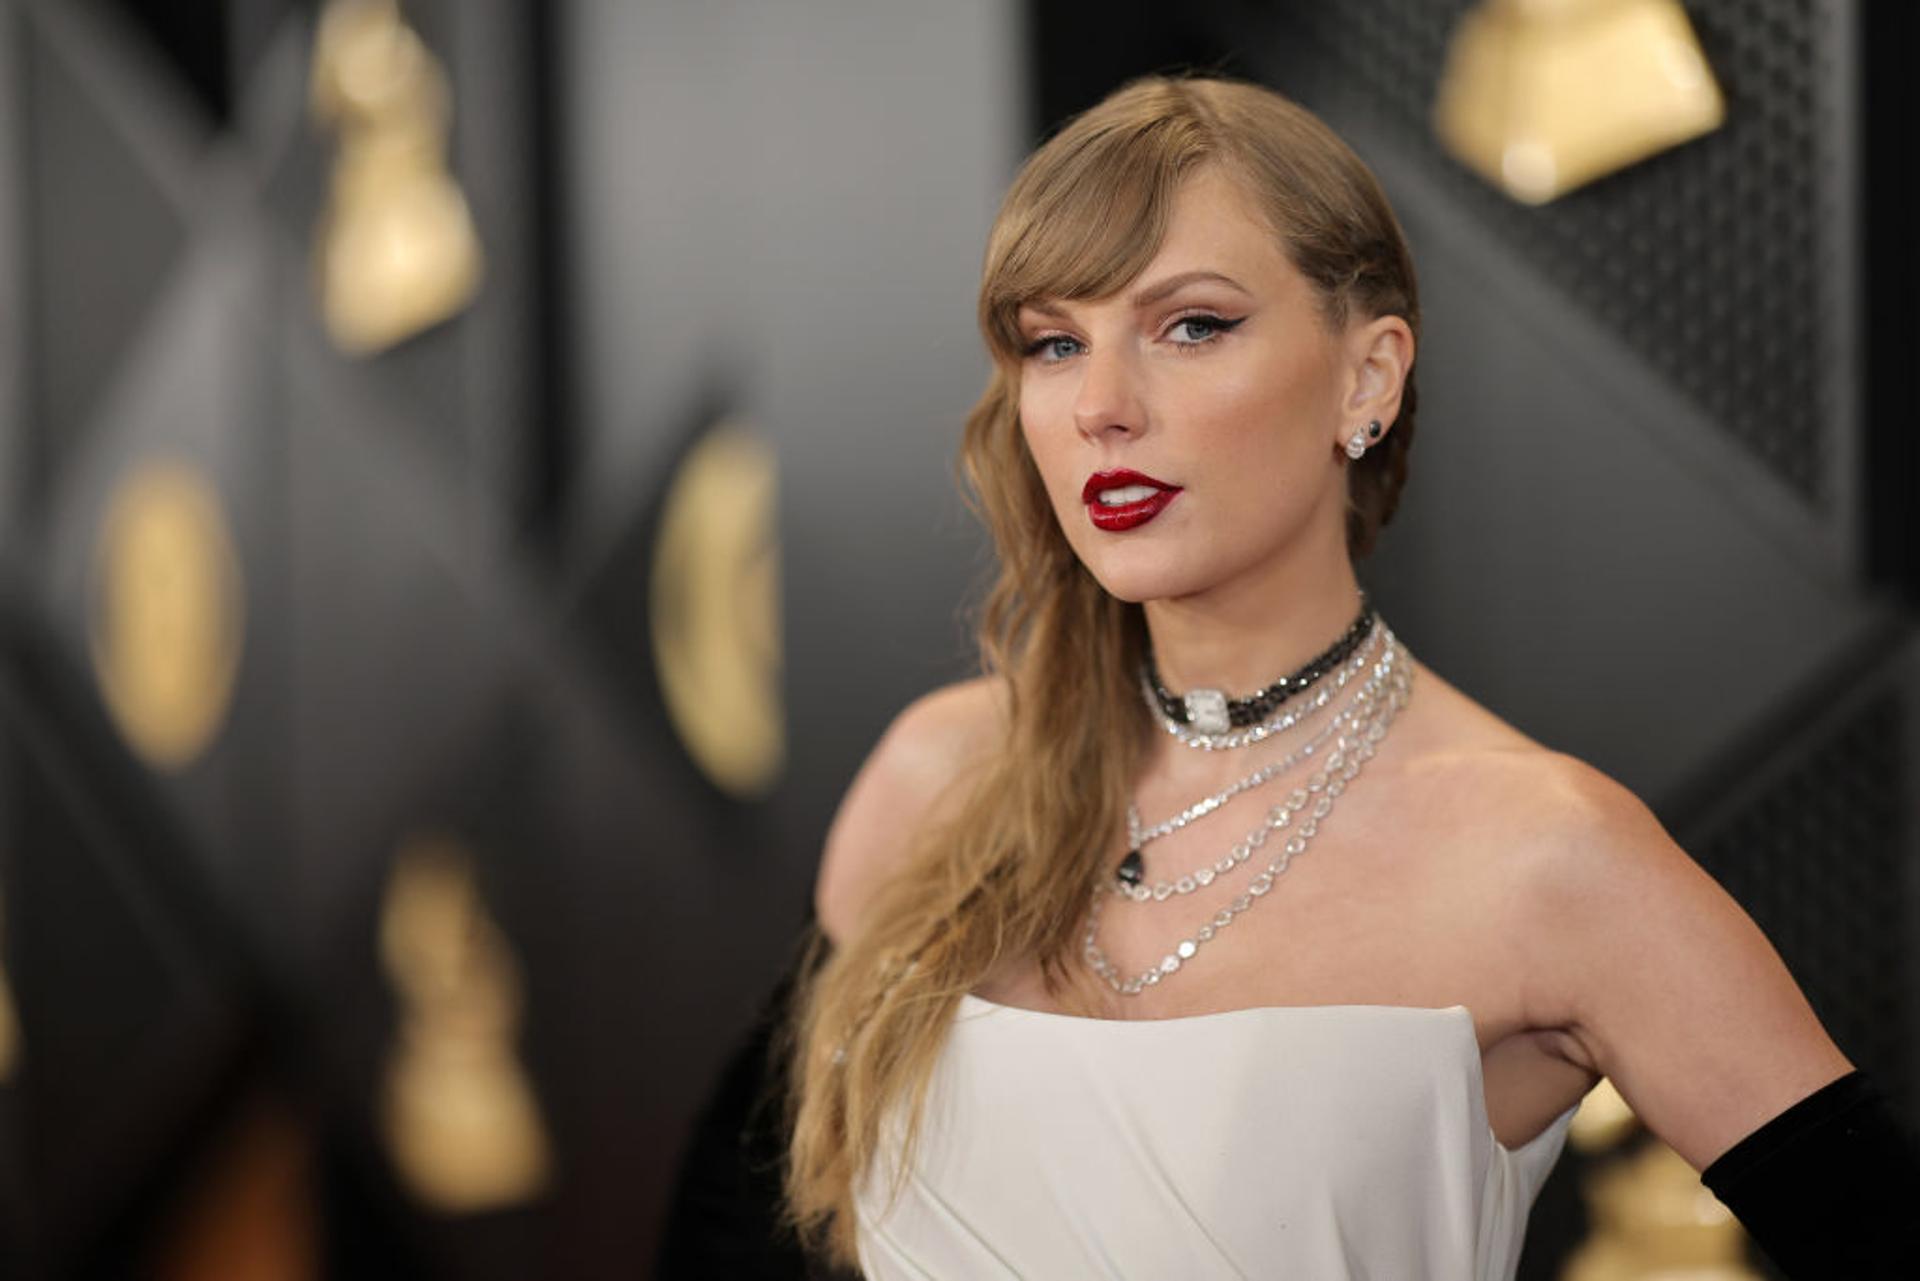 Taylor Swift pictured in a white dress at the 66th Grammy Awards